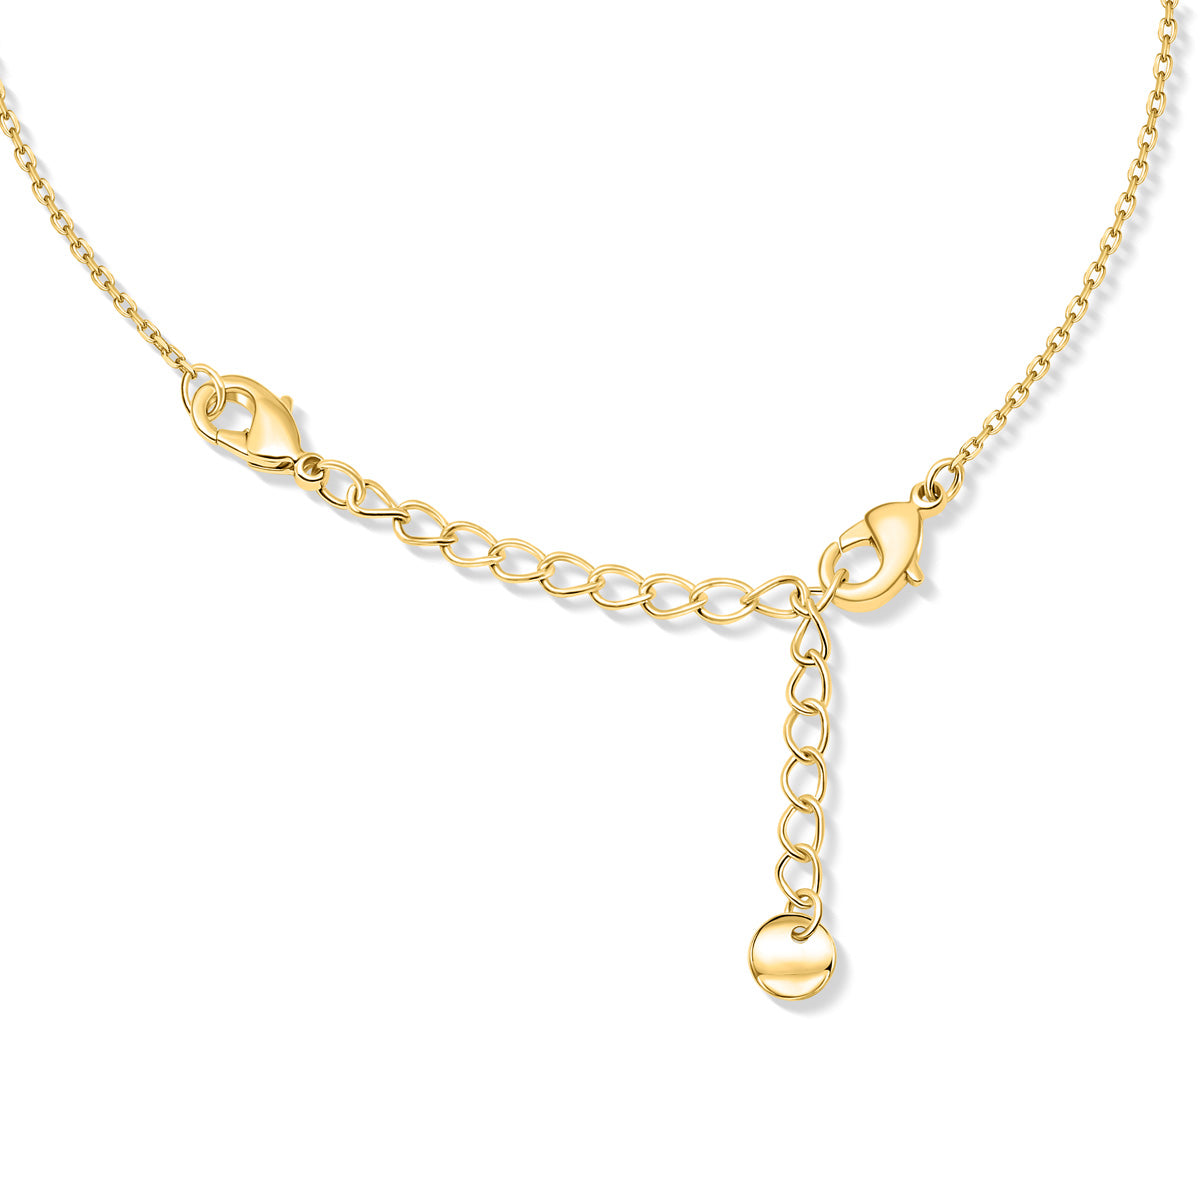 Small gold plated necklace extender